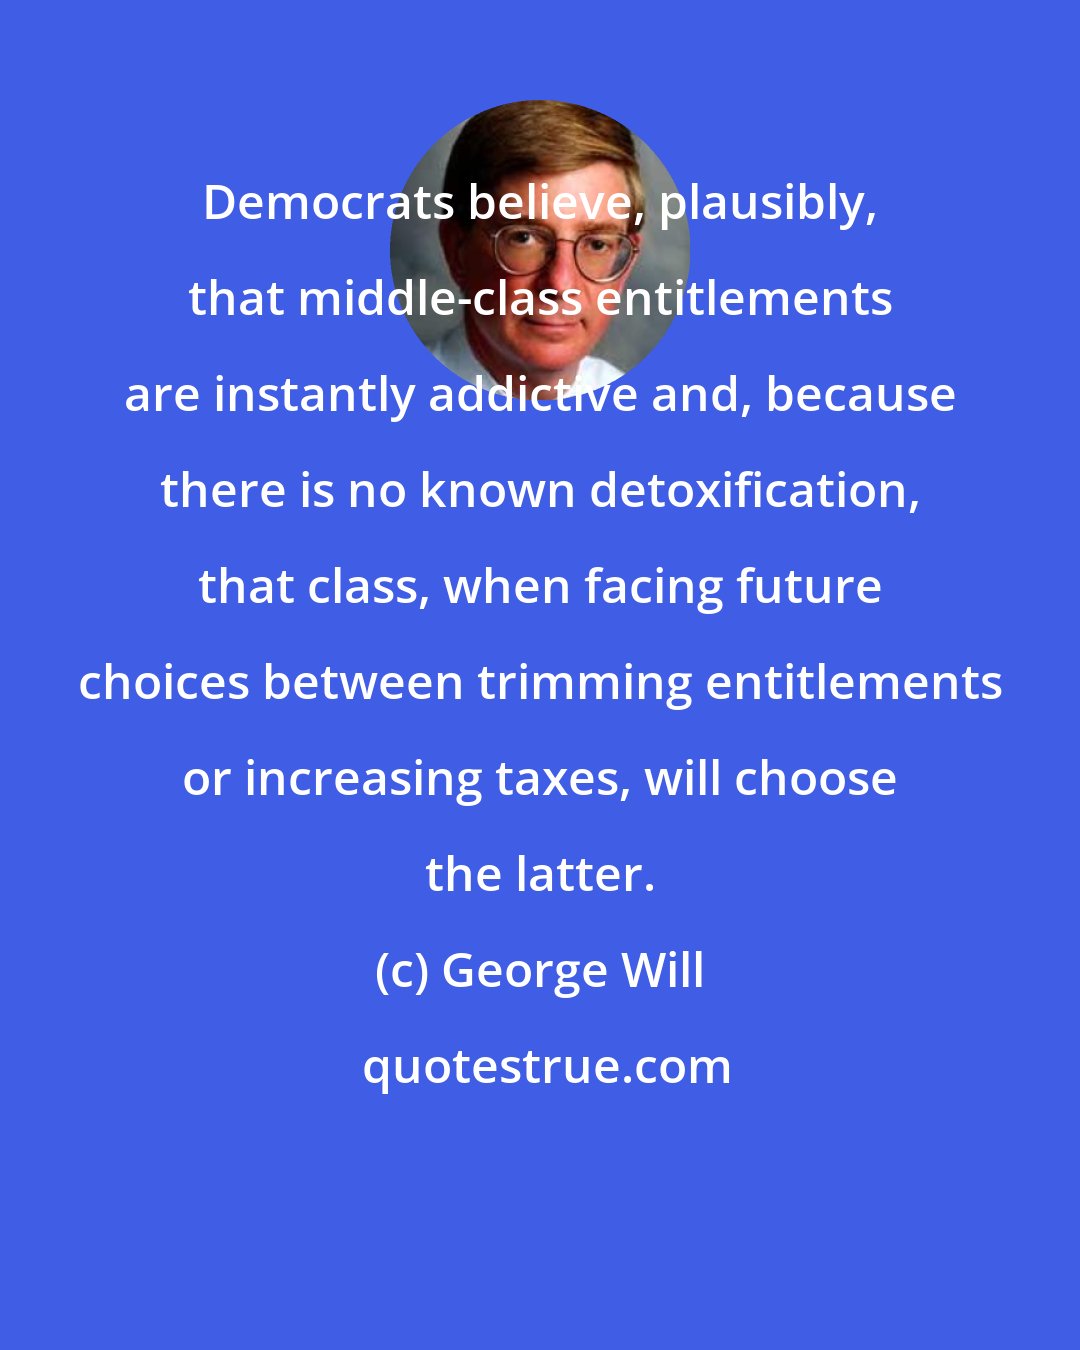 George Will: Democrats believe, plausibly, that middle-class entitlements are instantly addictive and, because there is no known detoxification, that class, when facing future choices between trimming entitlements or increasing taxes, will choose the latter.